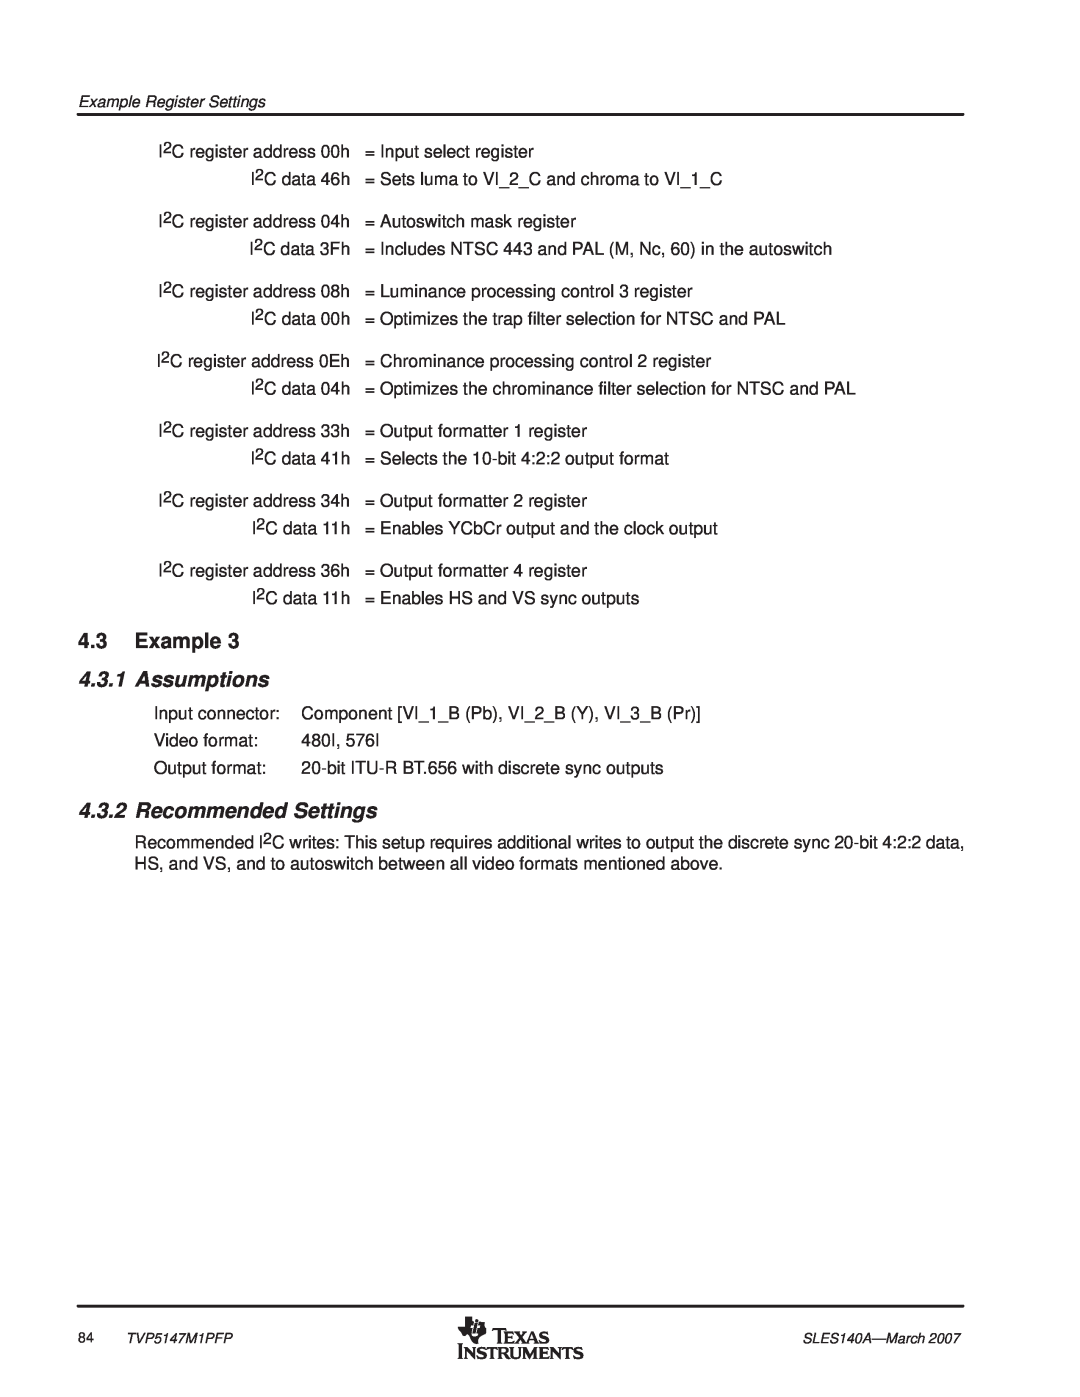 Texas Instruments TVP5147M1PFP manual 4.3.1, Recommended Settings, Example, Assumptions 